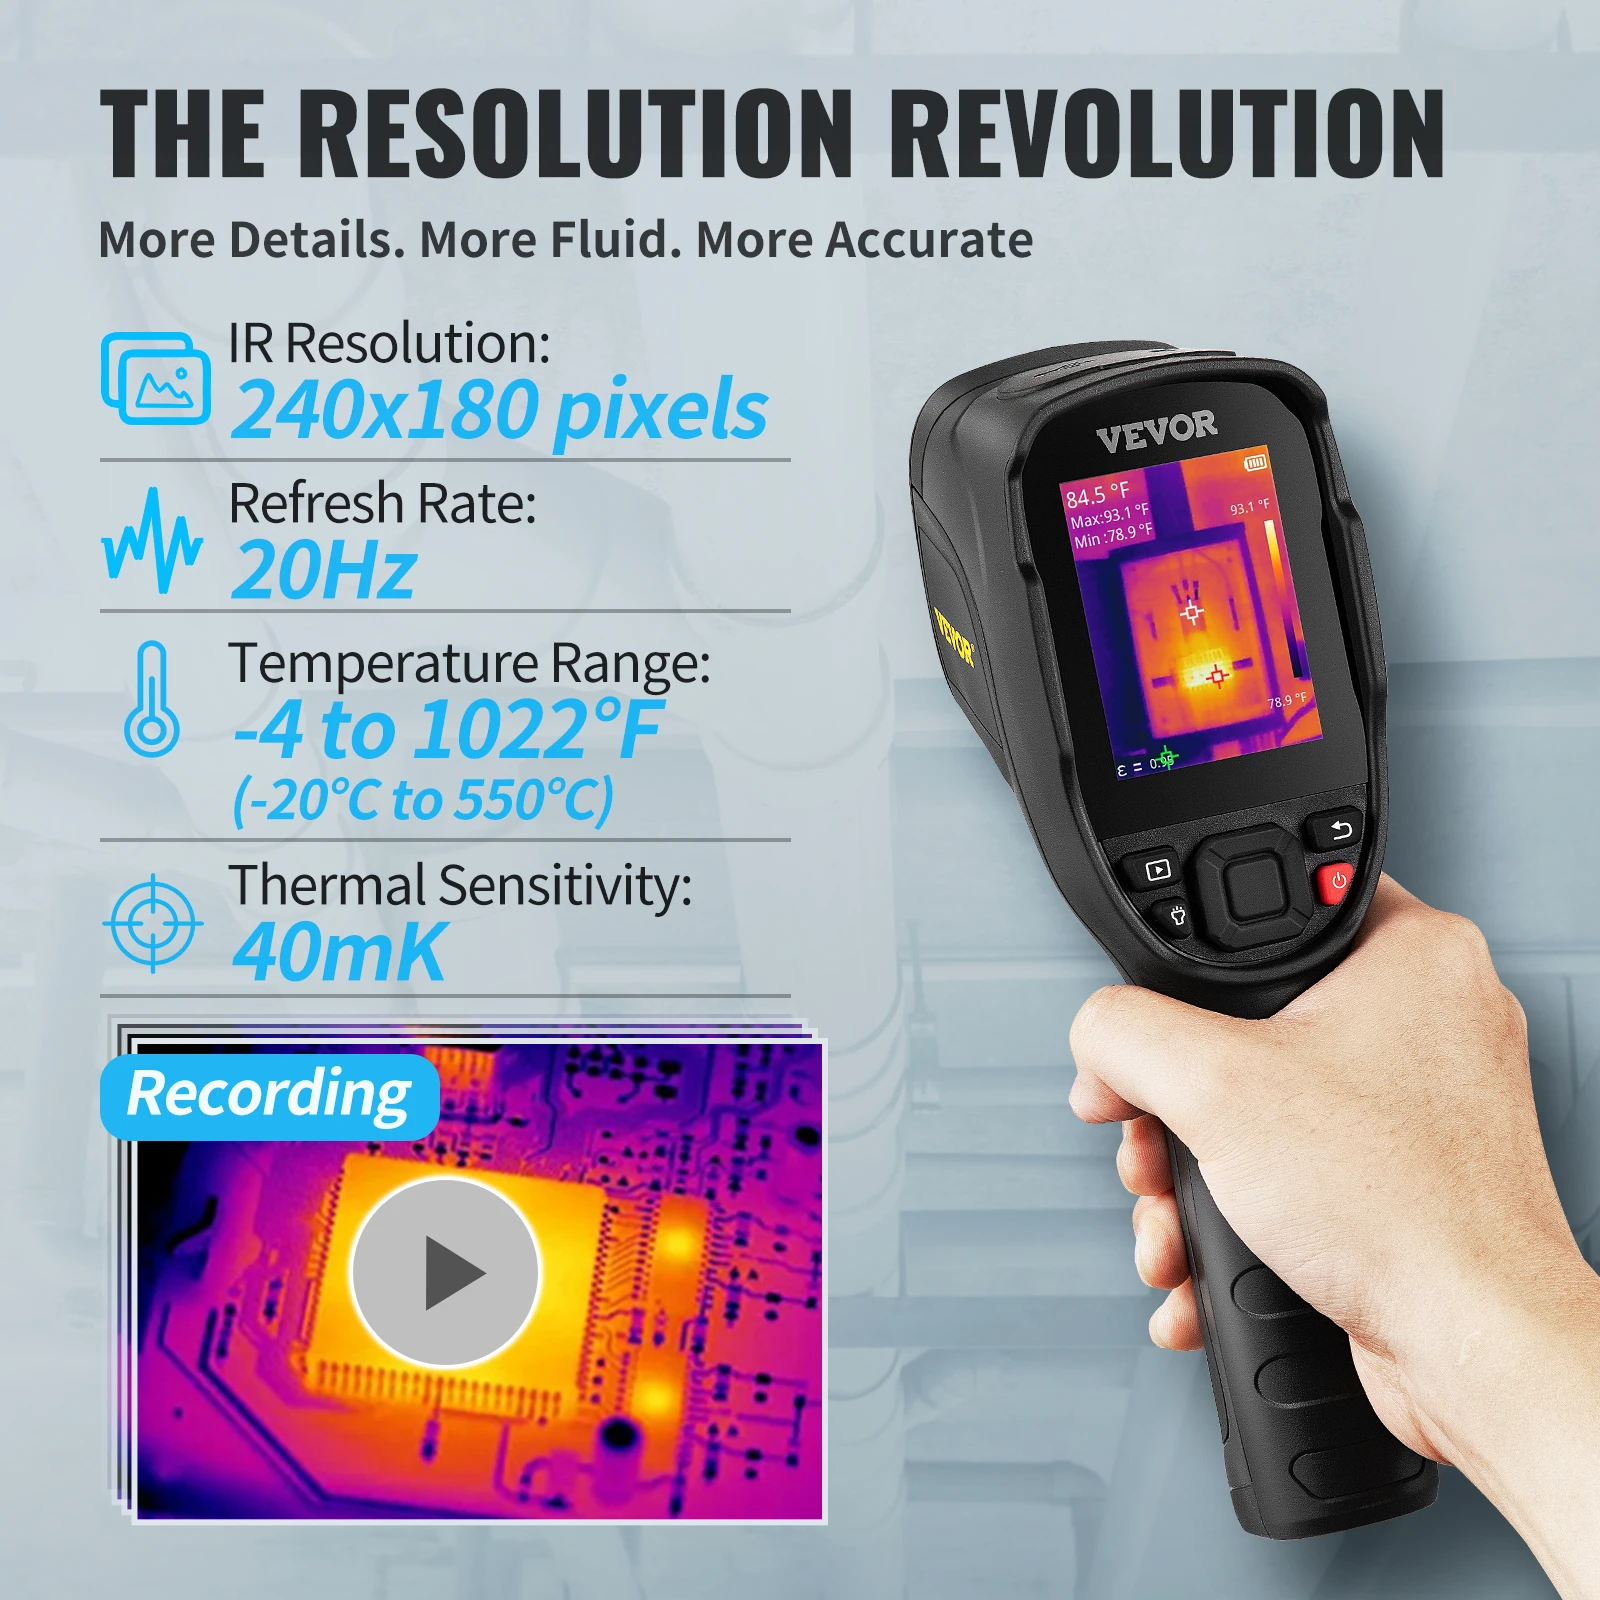 VEVOR Thermal Imager 240x180 IR Resolution with 2MP Visual Camera Handheld Infrared Thermal Camera for Repair Pipeline Detection